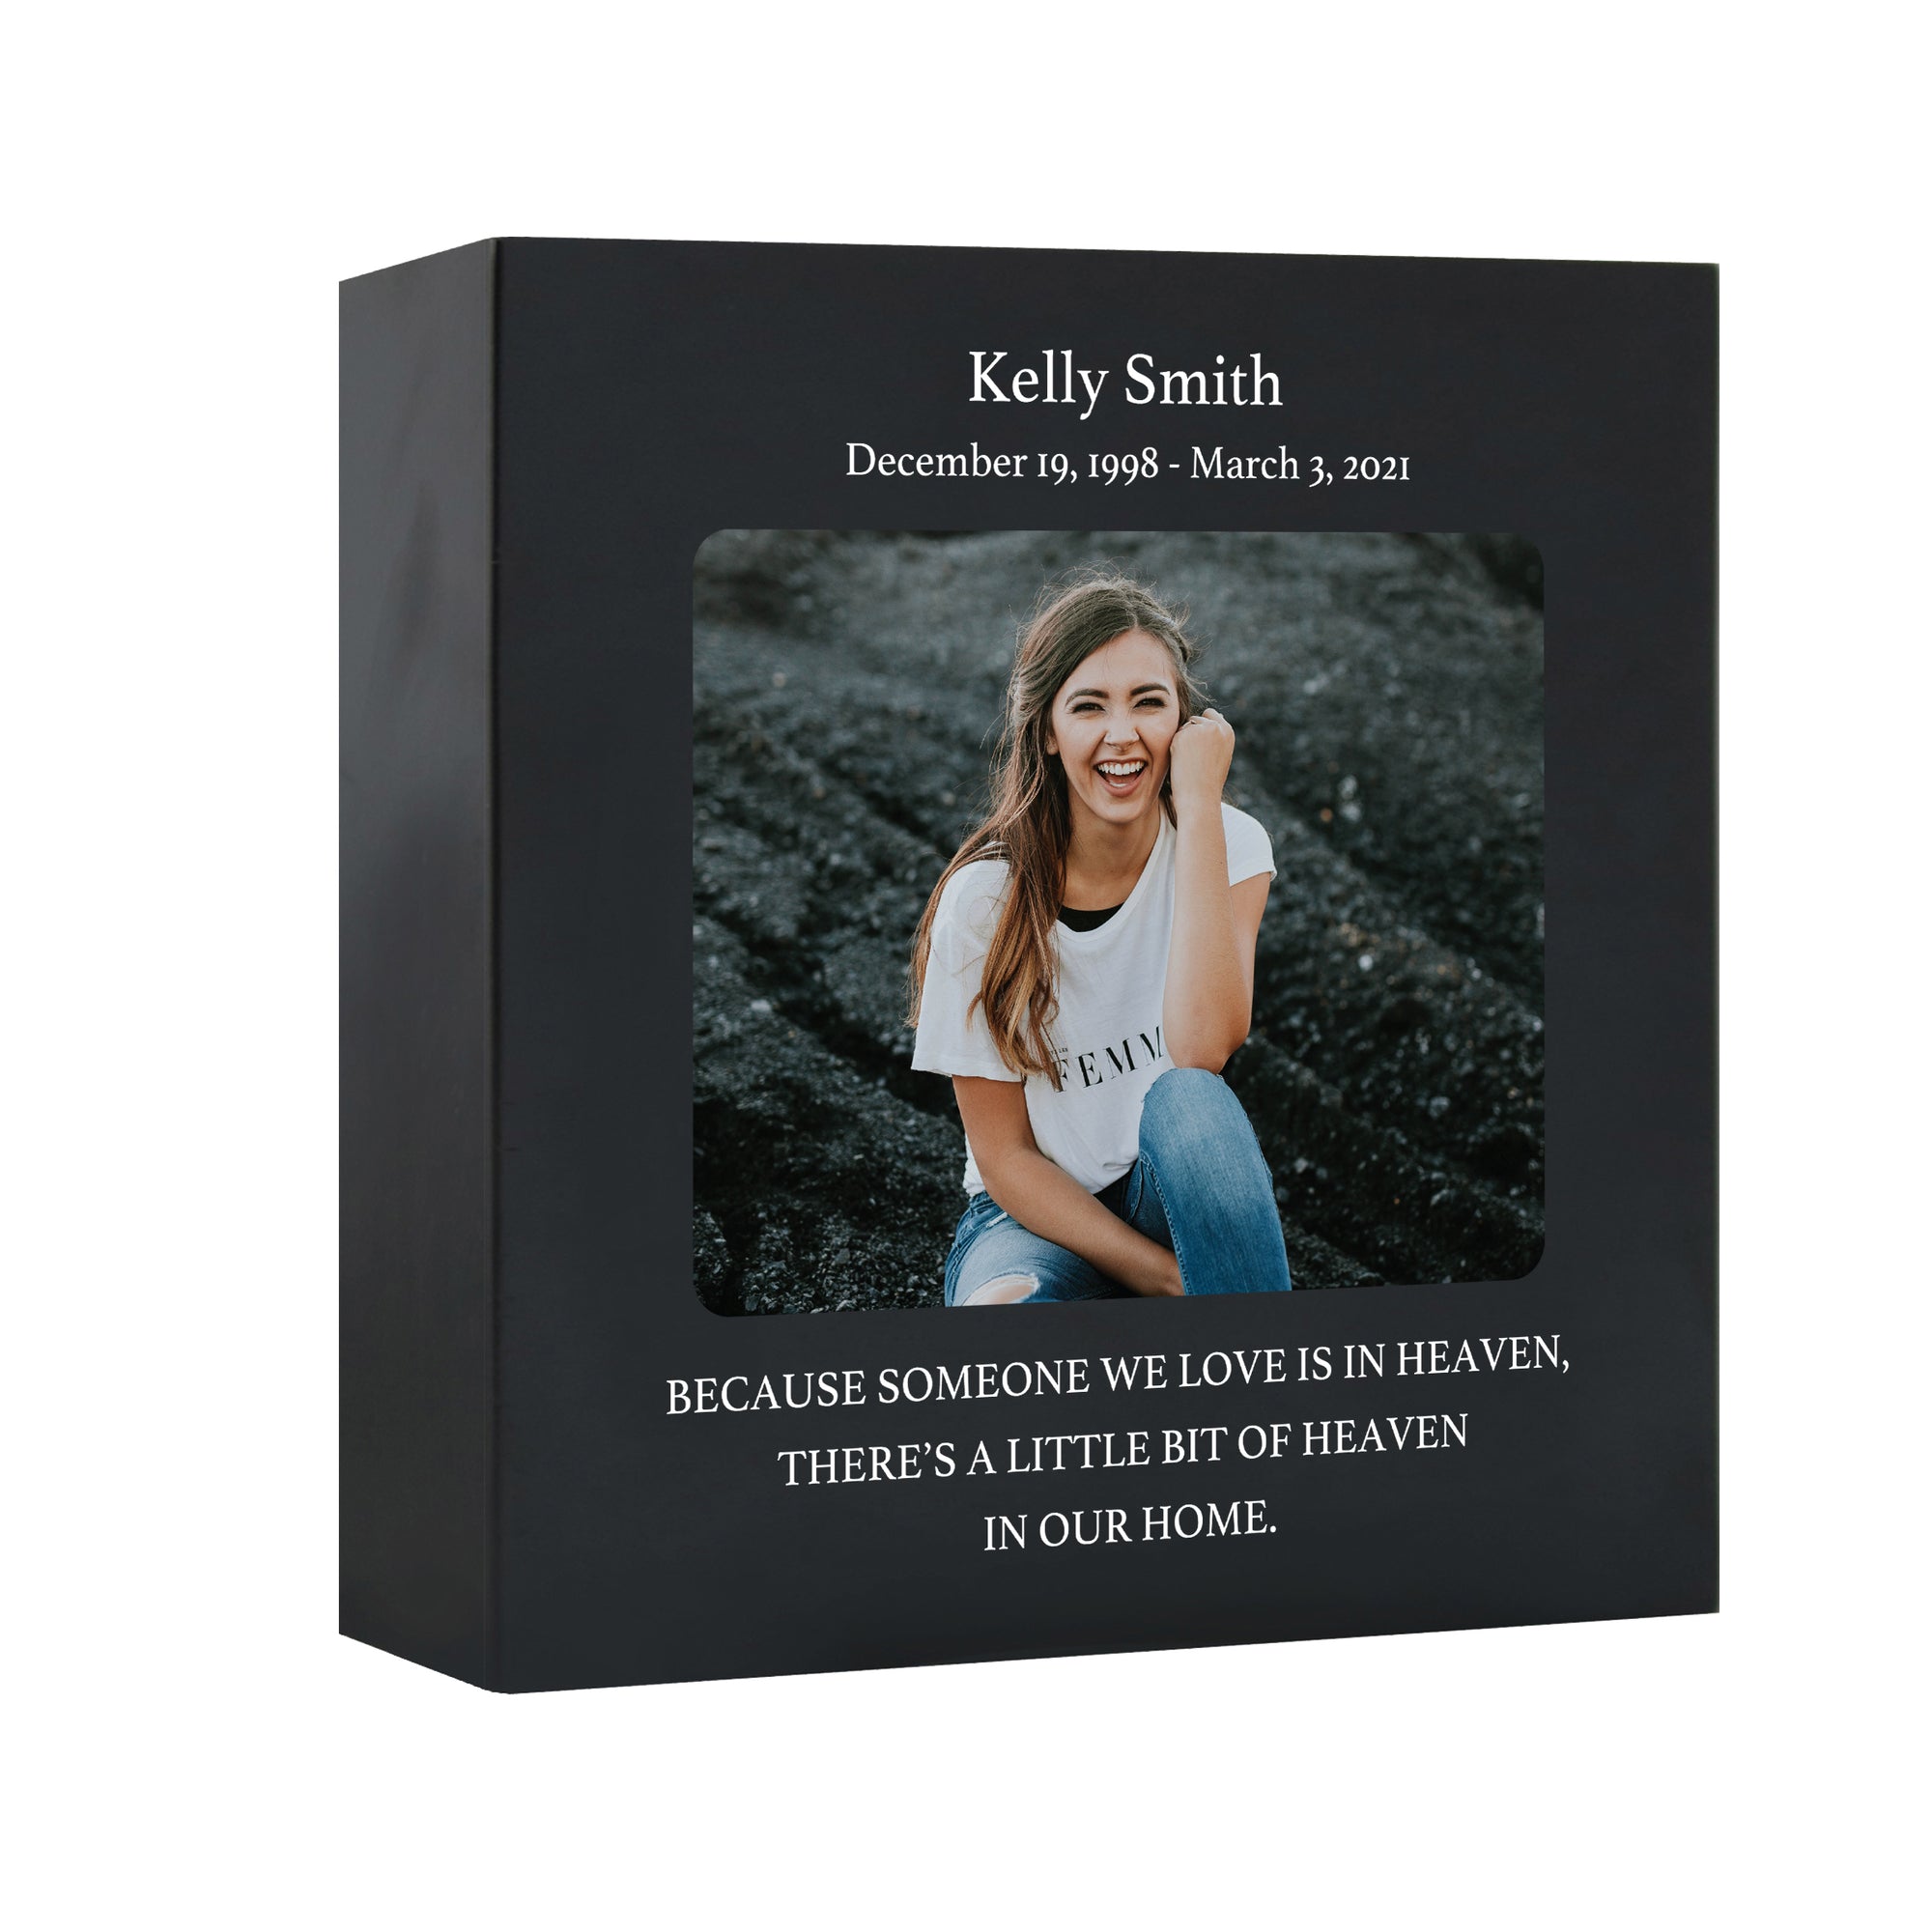 Timeless Human Memorial Shadow Box Photo Urn in Black - Because Someone We Love